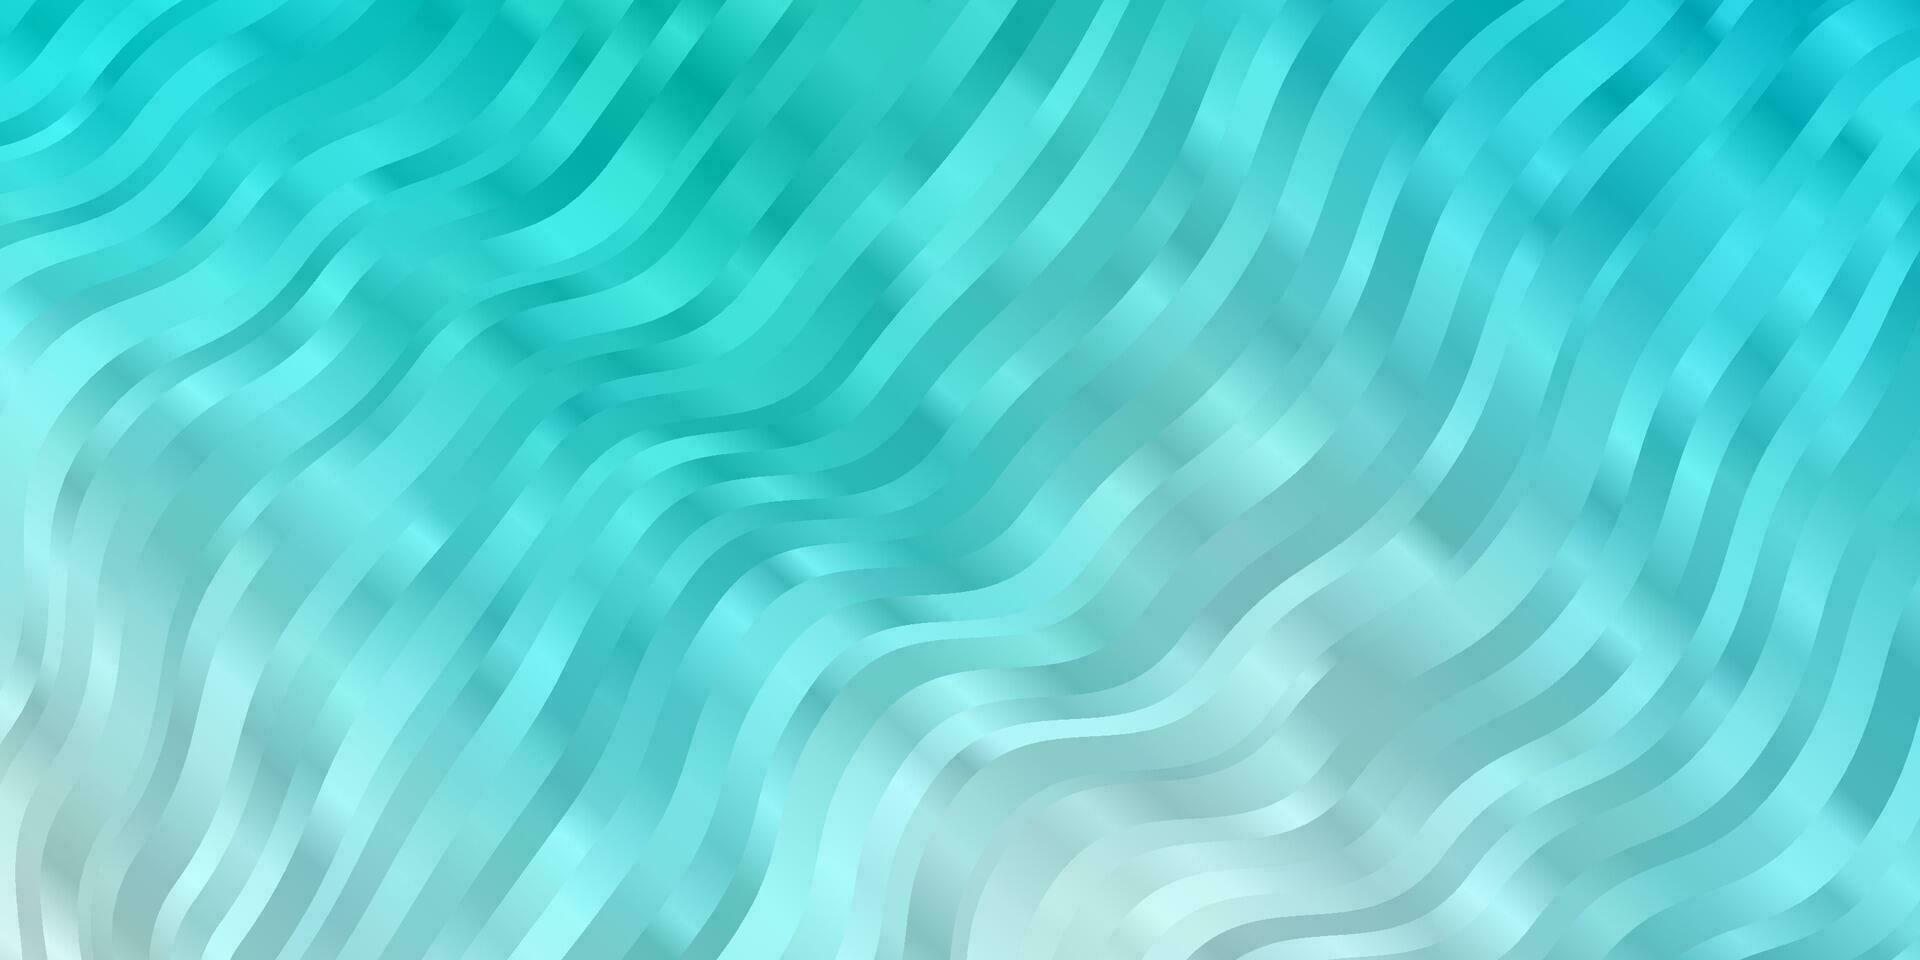 Light Blue, Green vector background with bent lines.